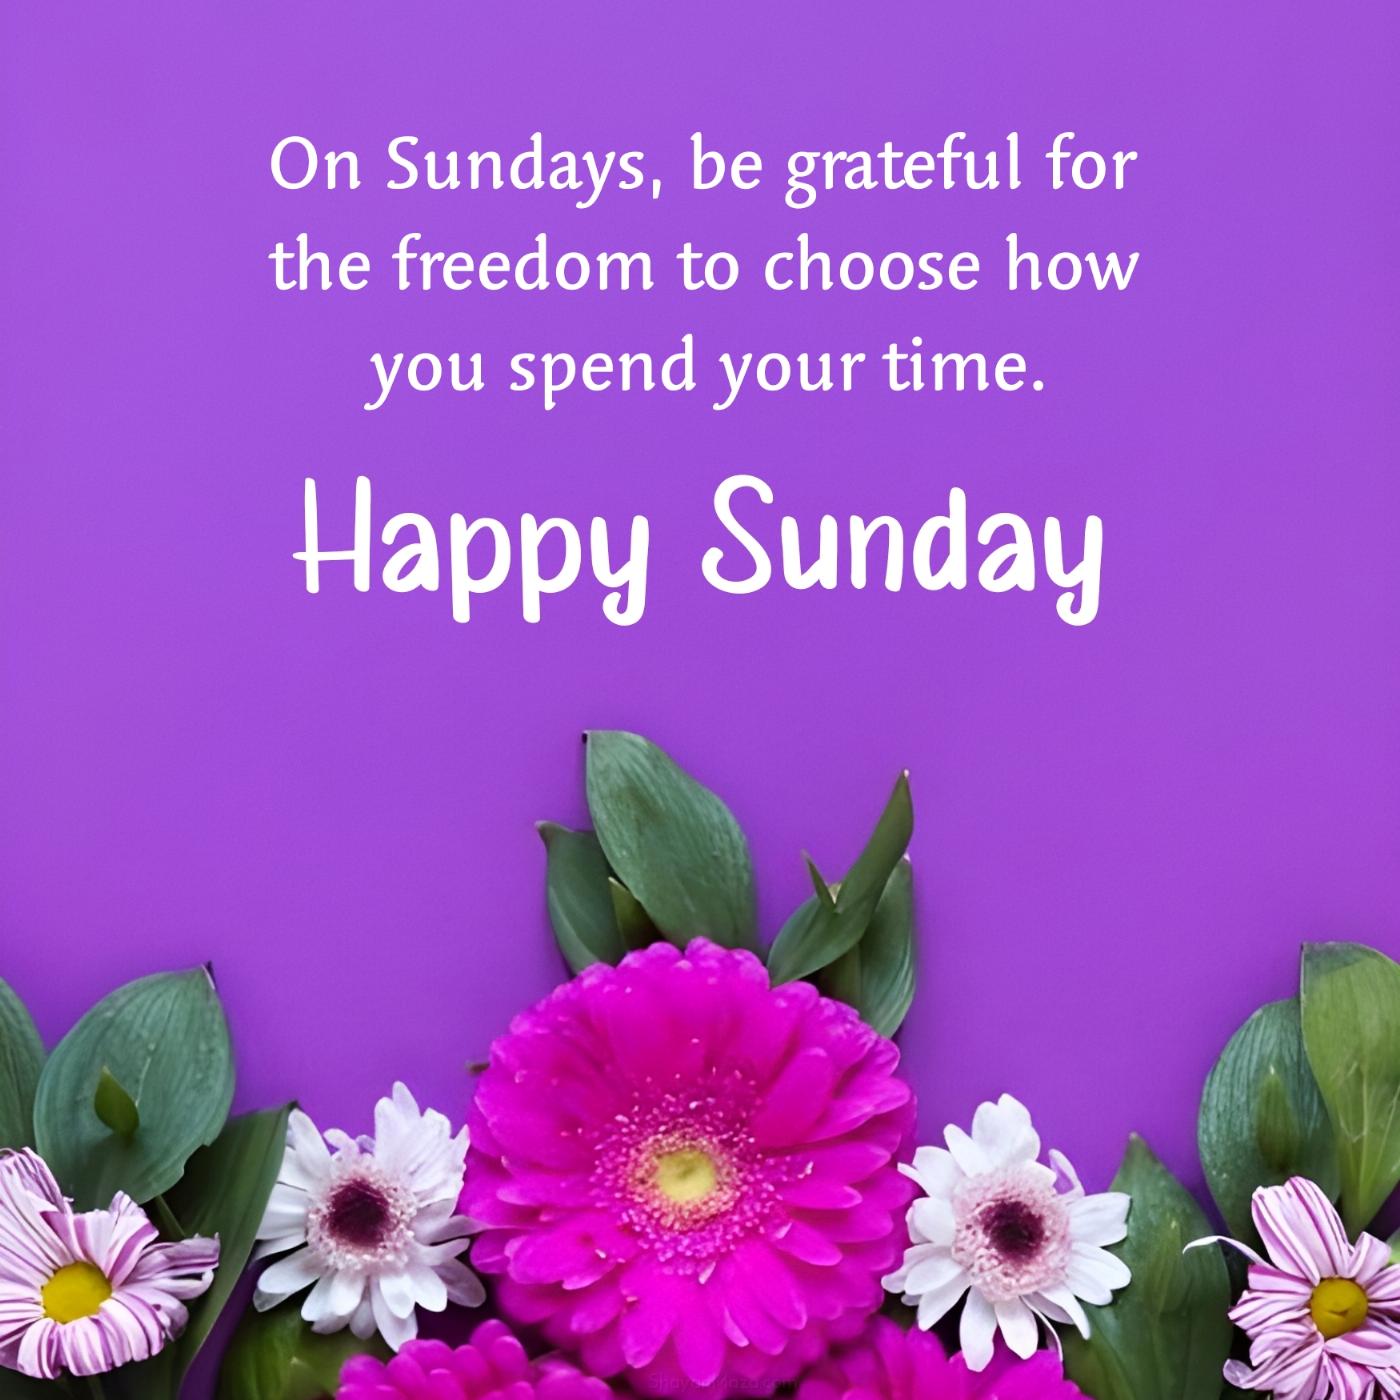 On Sundays be grateful for the freedom to choose